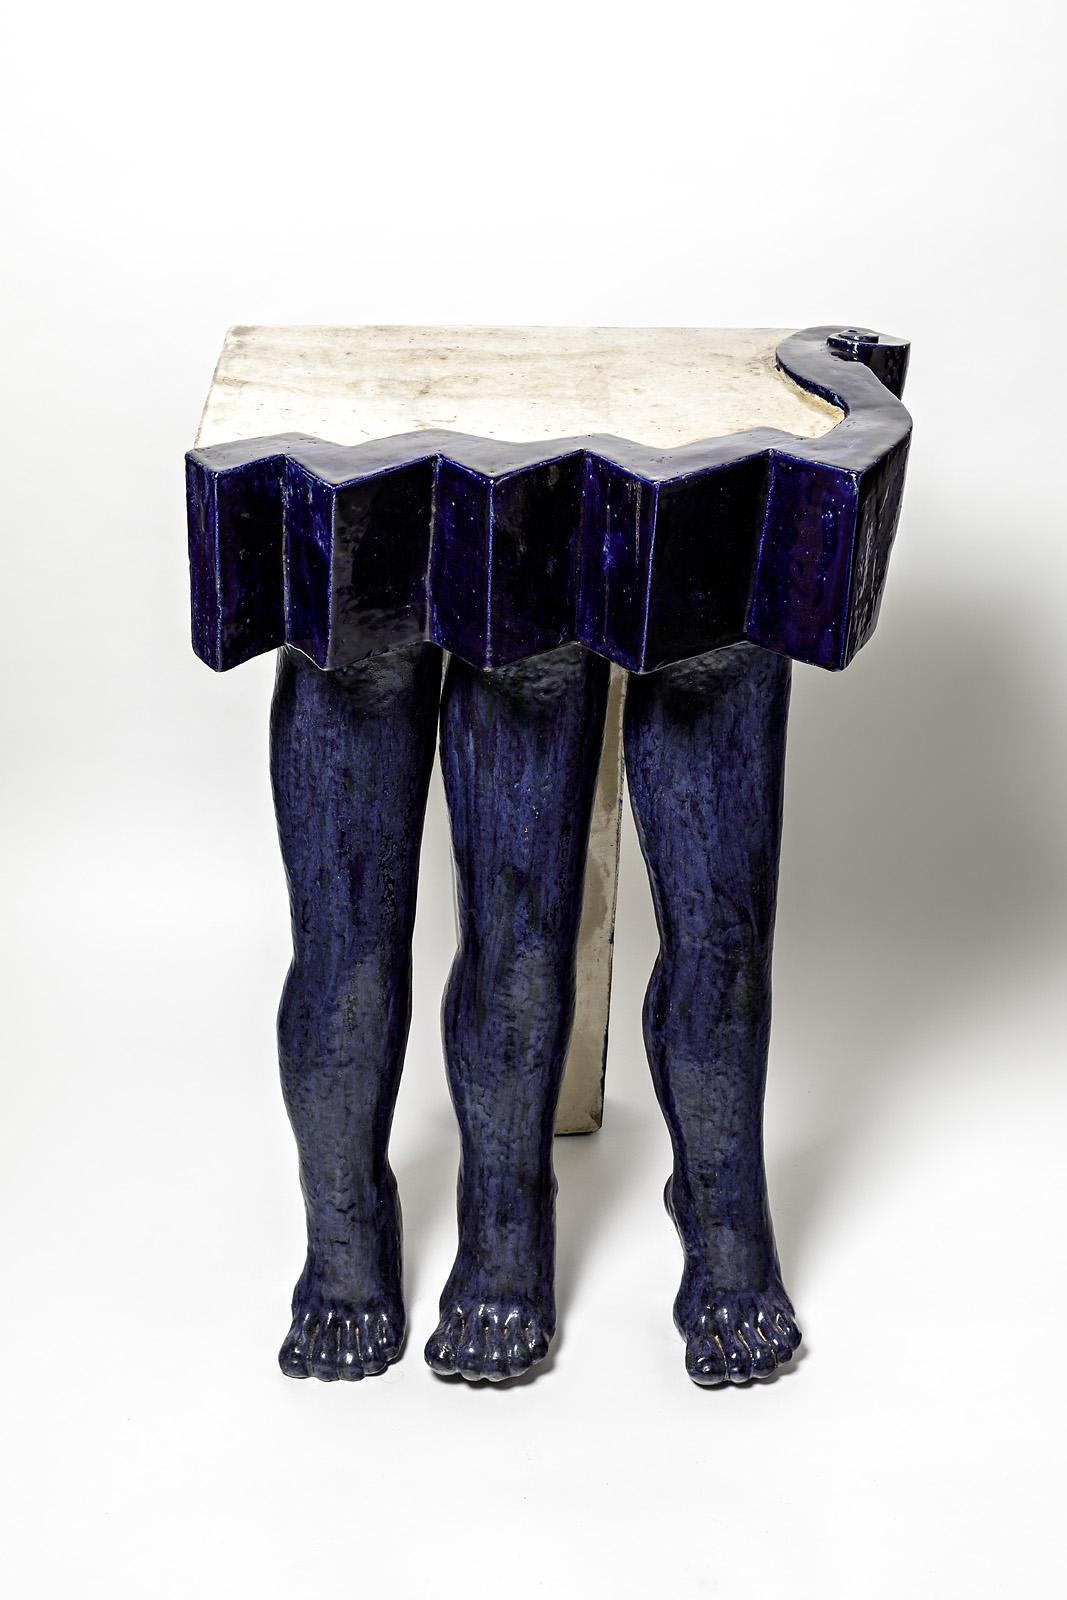 Jackye Coville (born in 1936)

Exceptional and decorative stoneware ceramic table console.

Measures: Height 90 cm, large 67cm, depth 45cm

Elegant white and blue ceramic colors.

Signed and dated on the plate: J COVILLE 96

It's a master